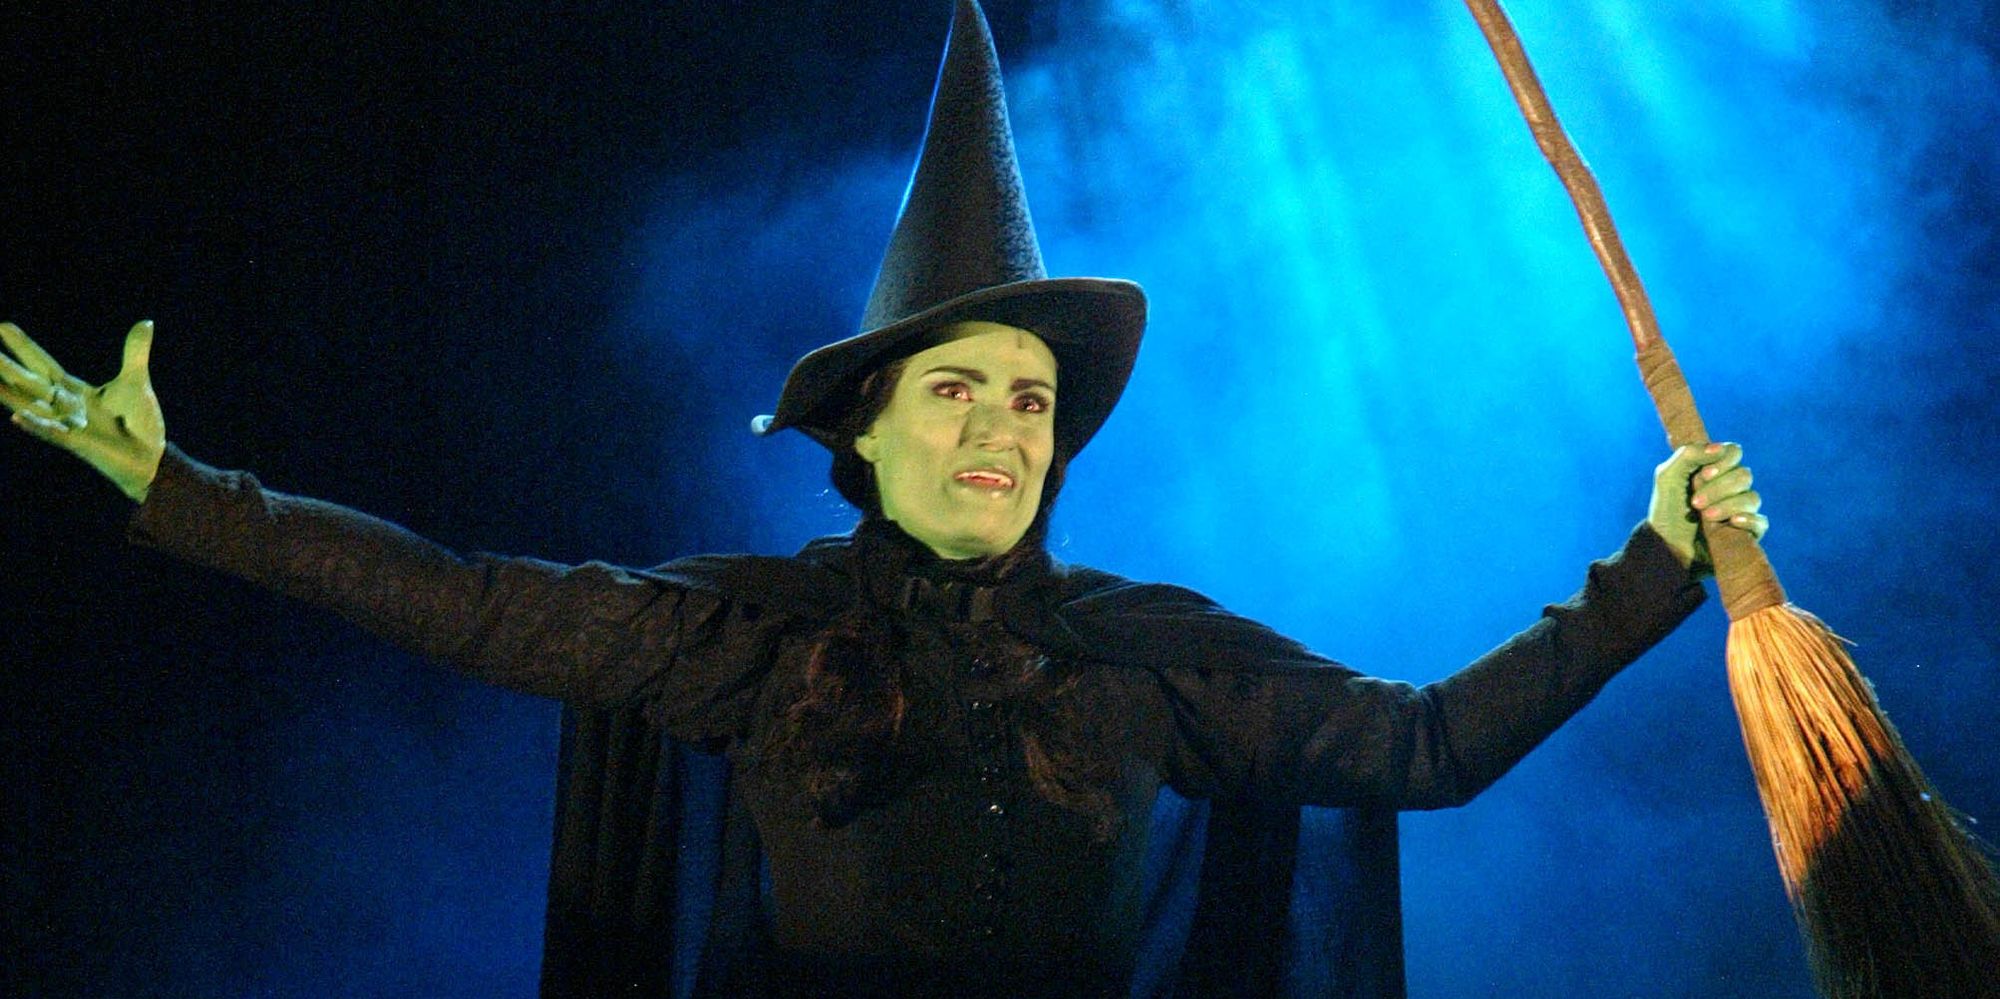 Why The Witch Is The Ultimate Feminist Icon | The Huffington Post